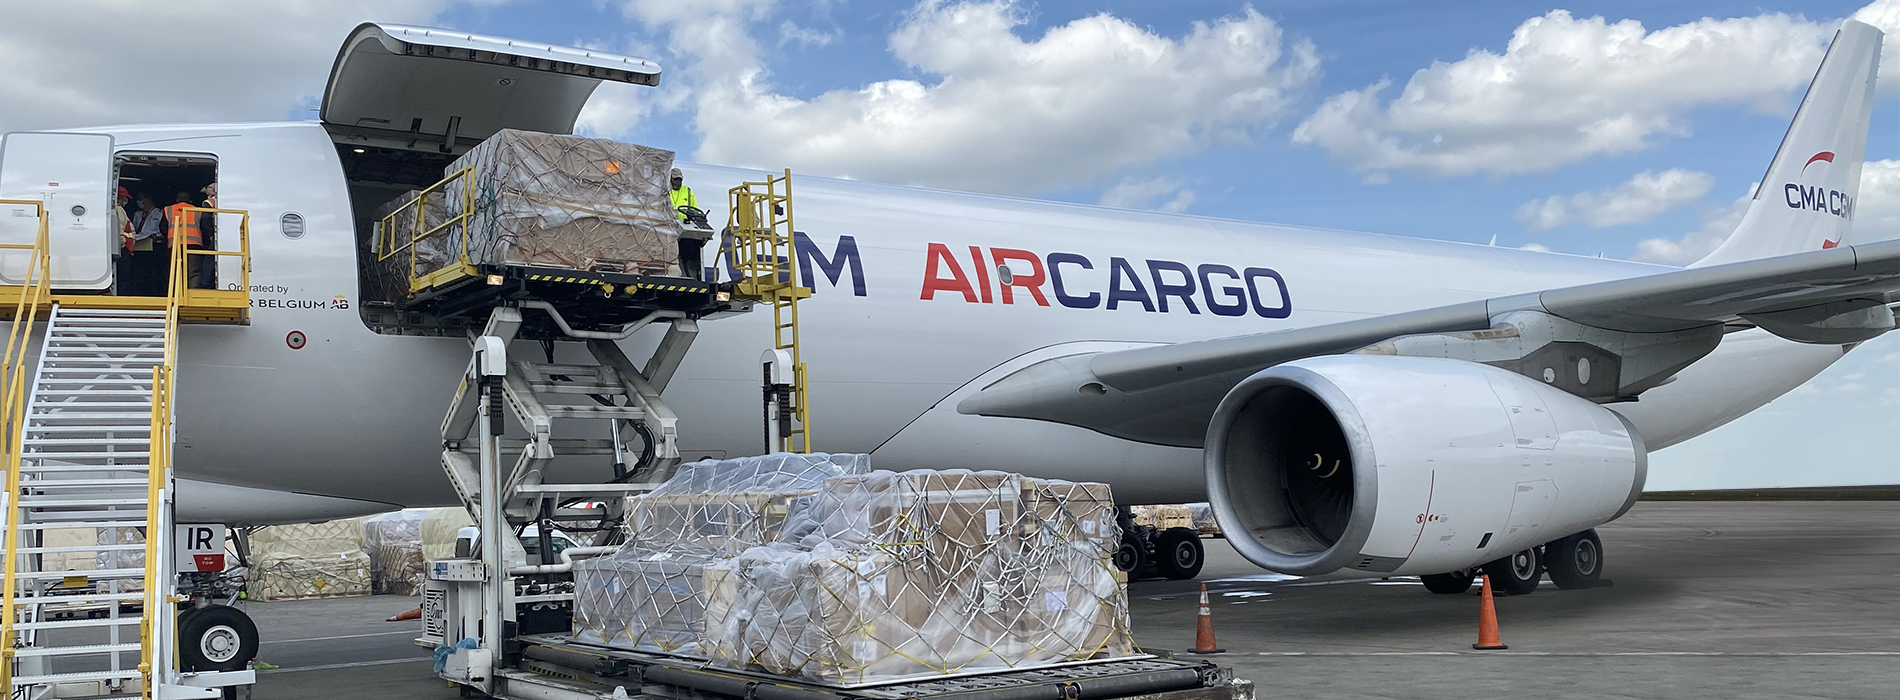 cma cgm air cargo expands its commercial offer by launching three new destinations